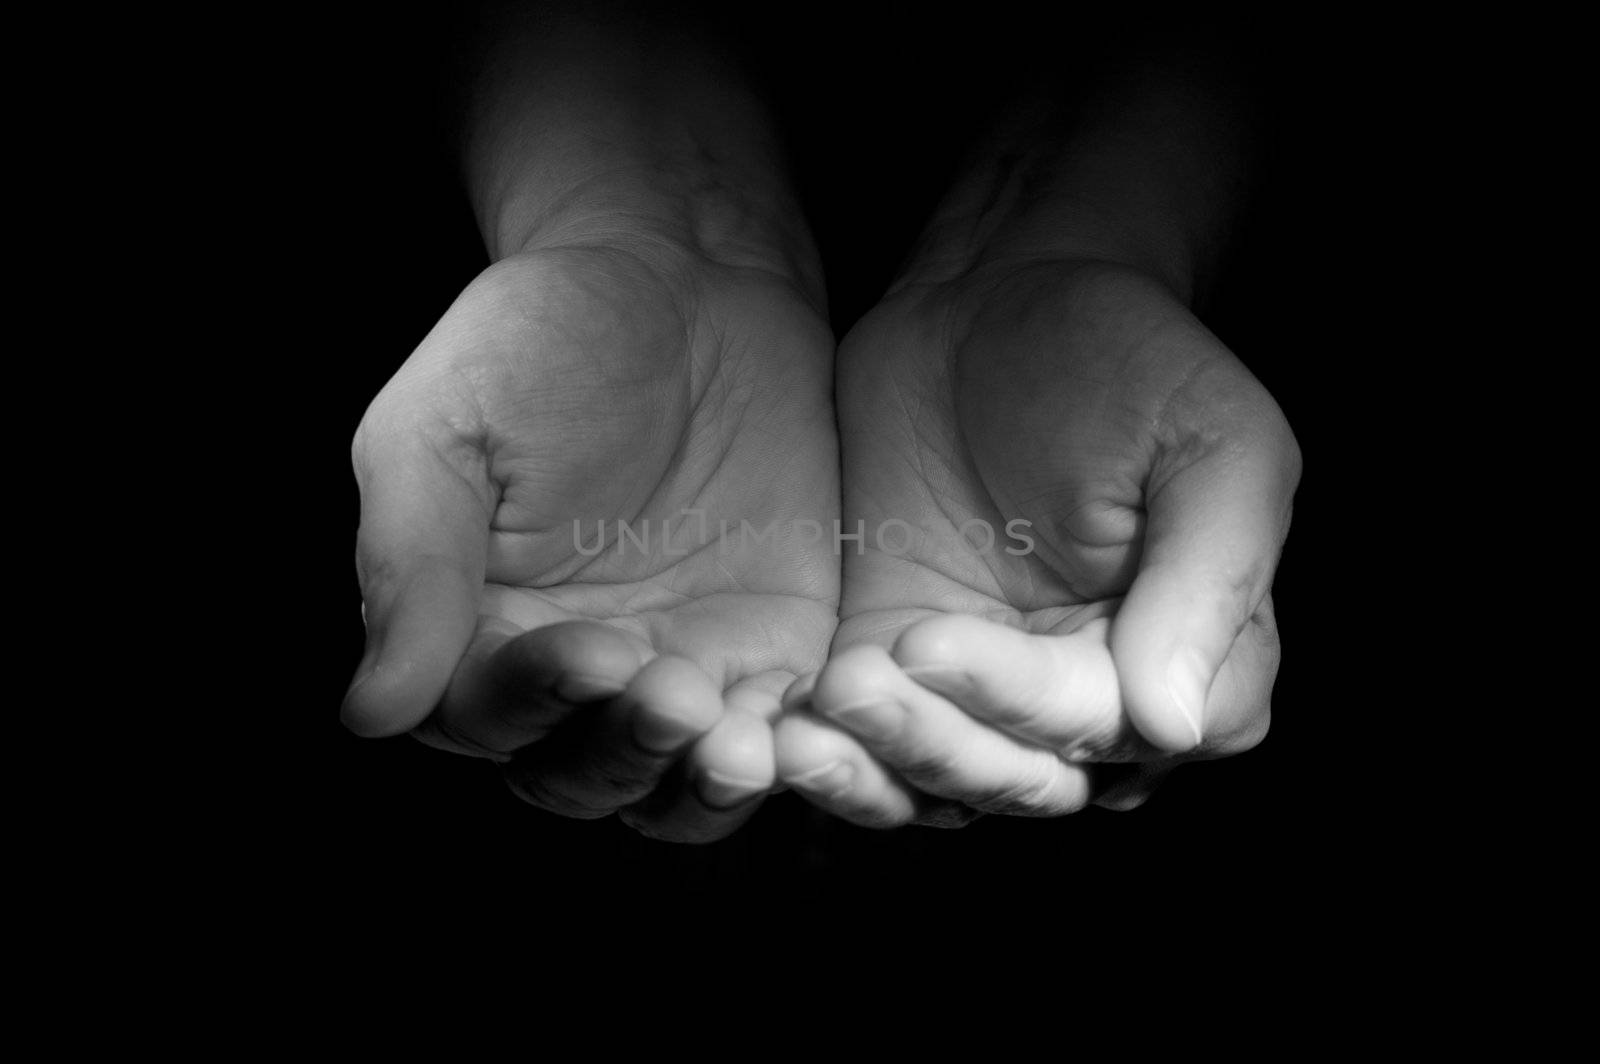 Two hands ask the charity from foto watcher